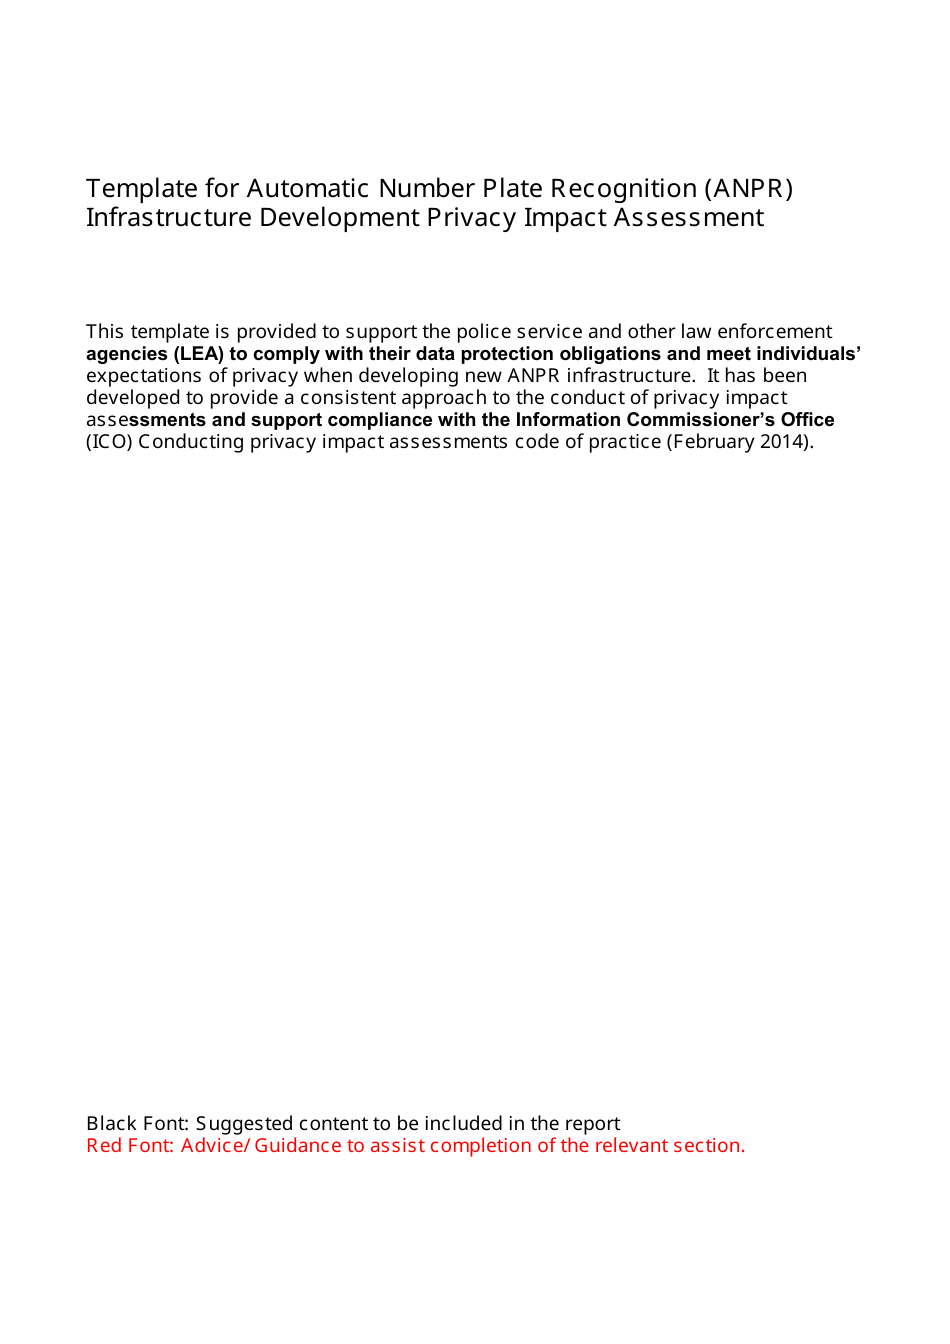 Template for Automatic Number Plate Recognition (Anpr) Infrastructure Development Privacy Impact Assessment - United Kingdom, Page 1